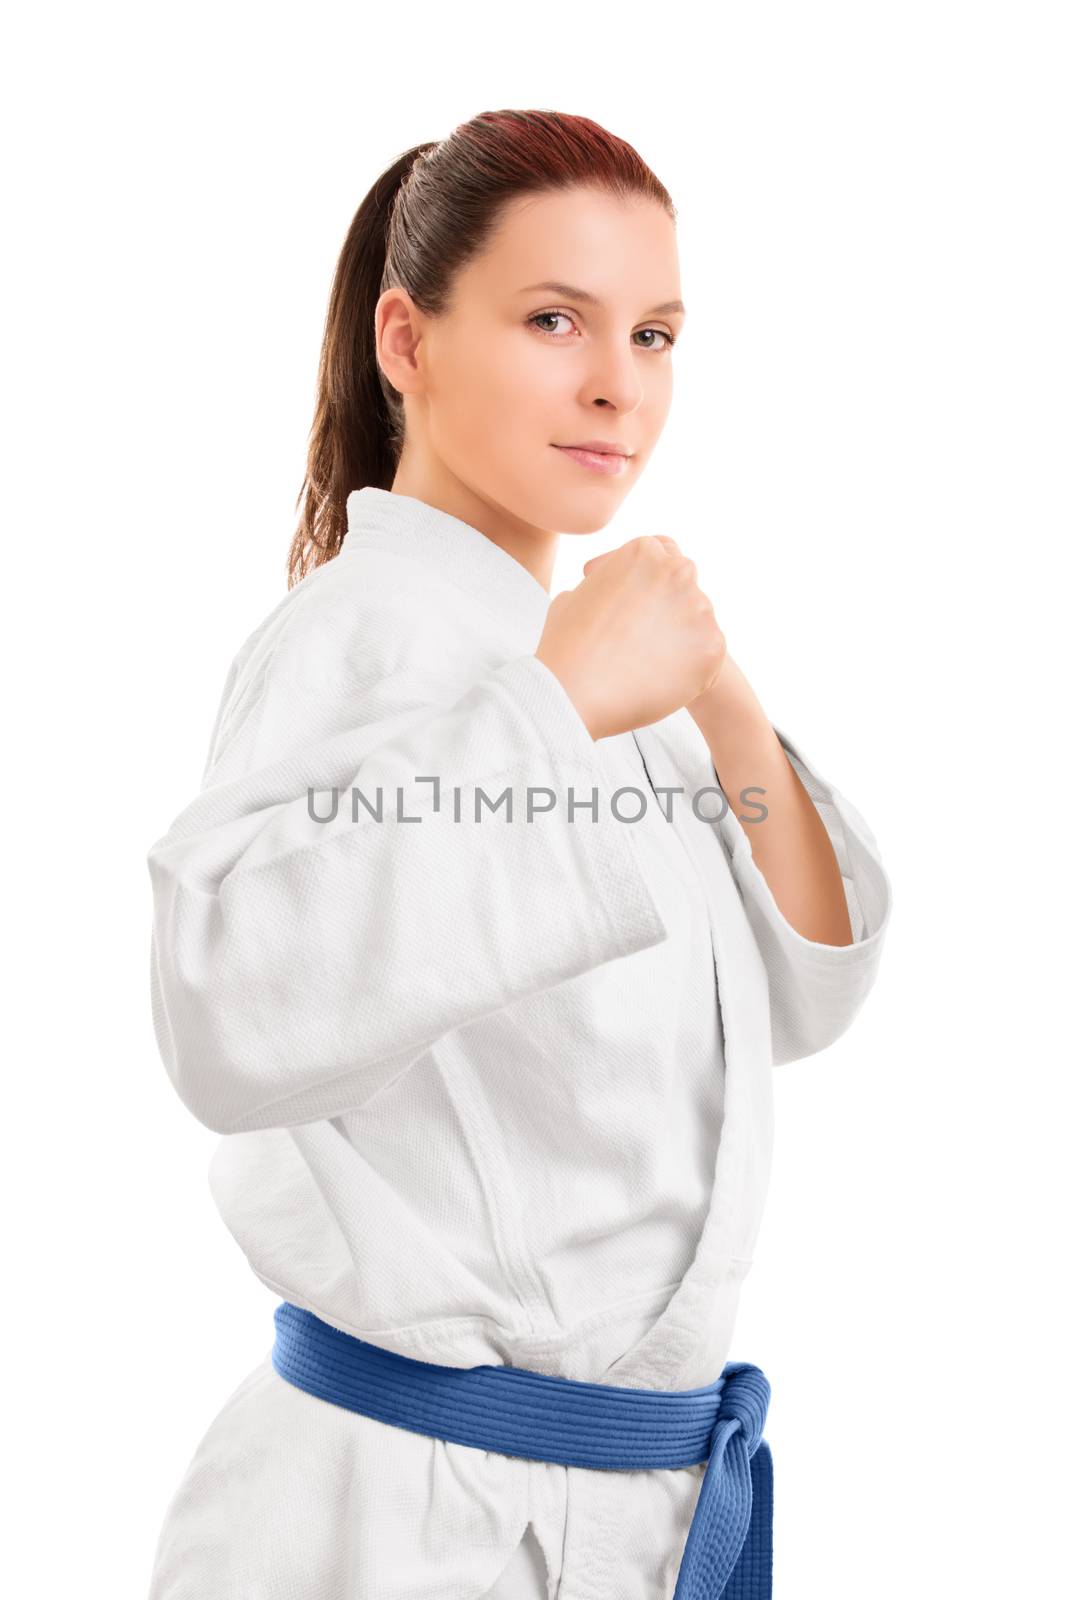 A portrait of a beautiful young girl in a kimono with blue belt standing in a combat stance, isolated on white background.